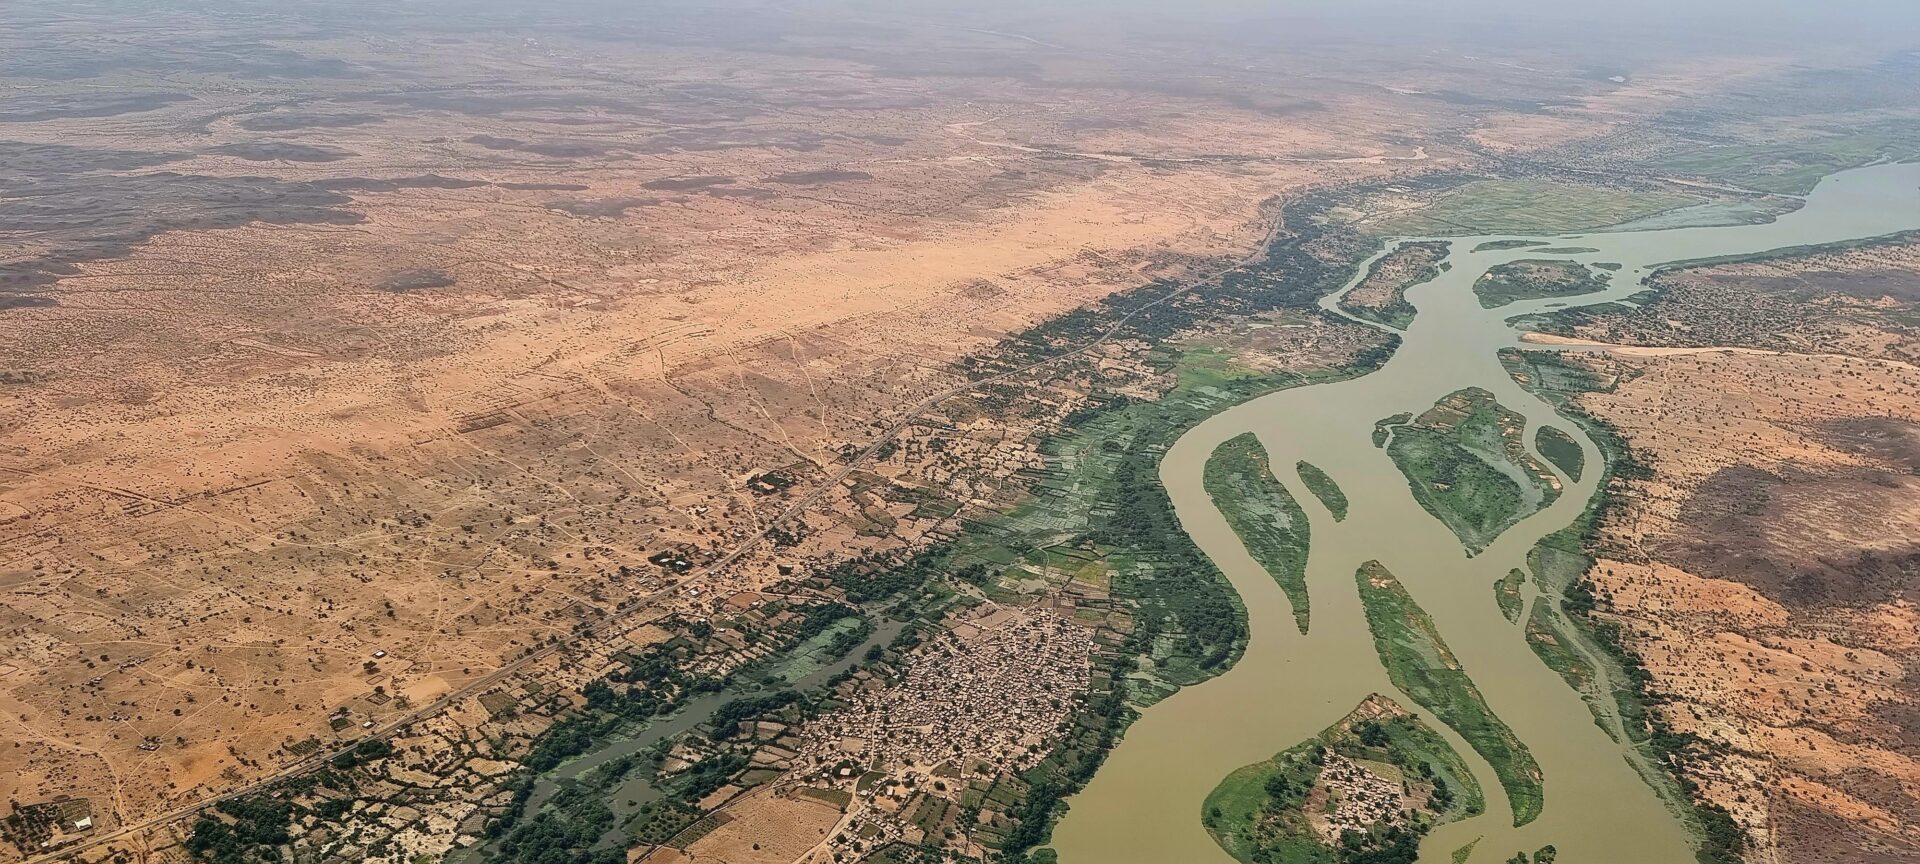 Aerial view of the Niger River, Niamey